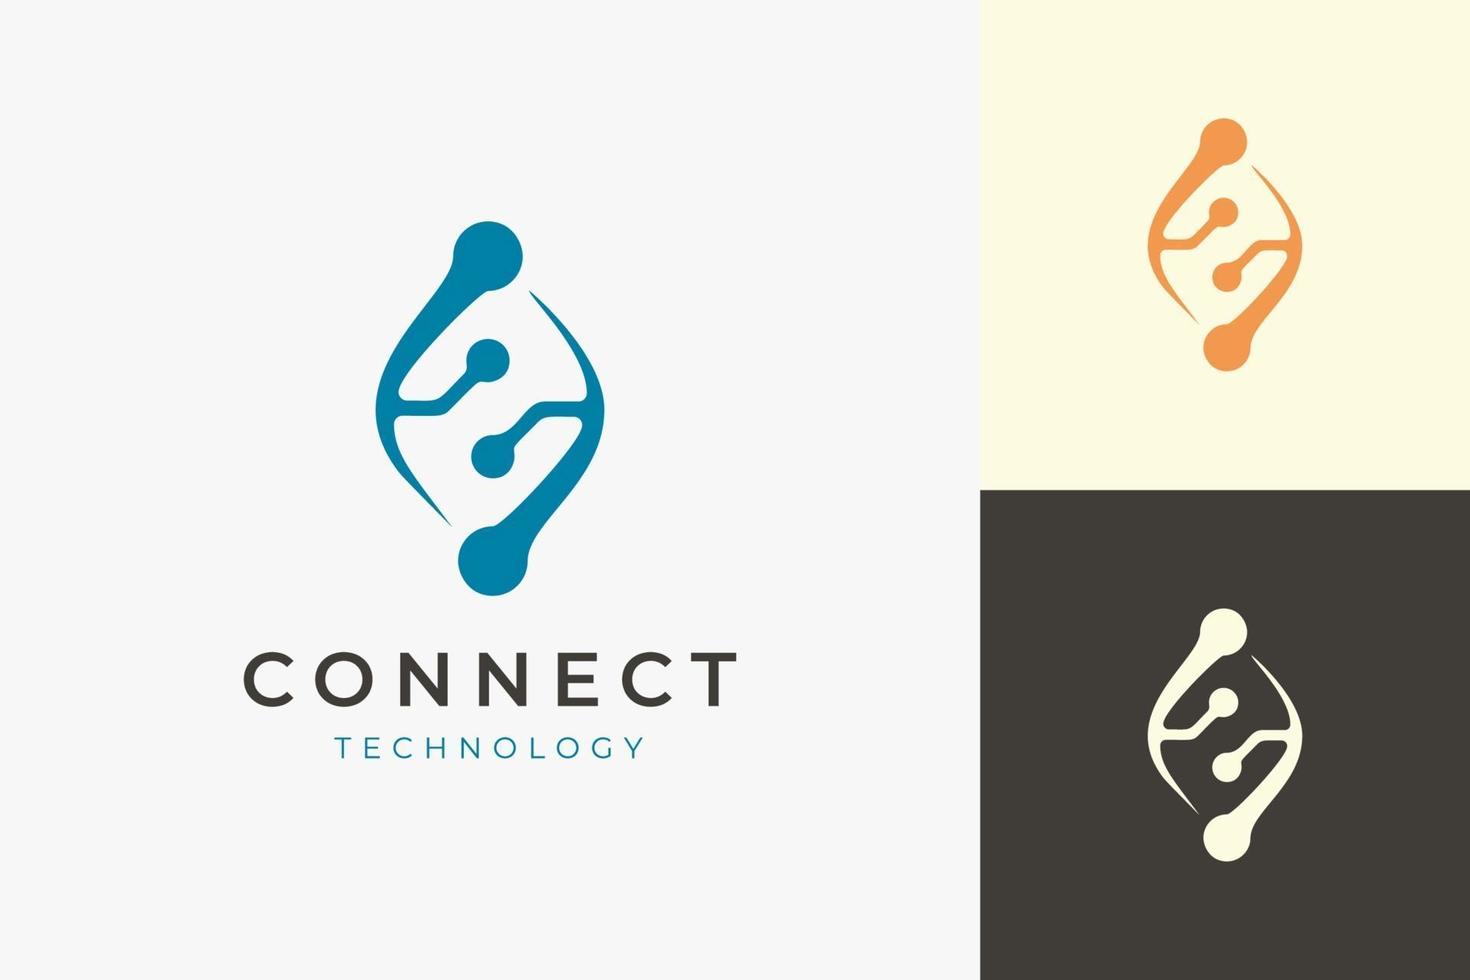 Connect technology logo in abstract shape vector